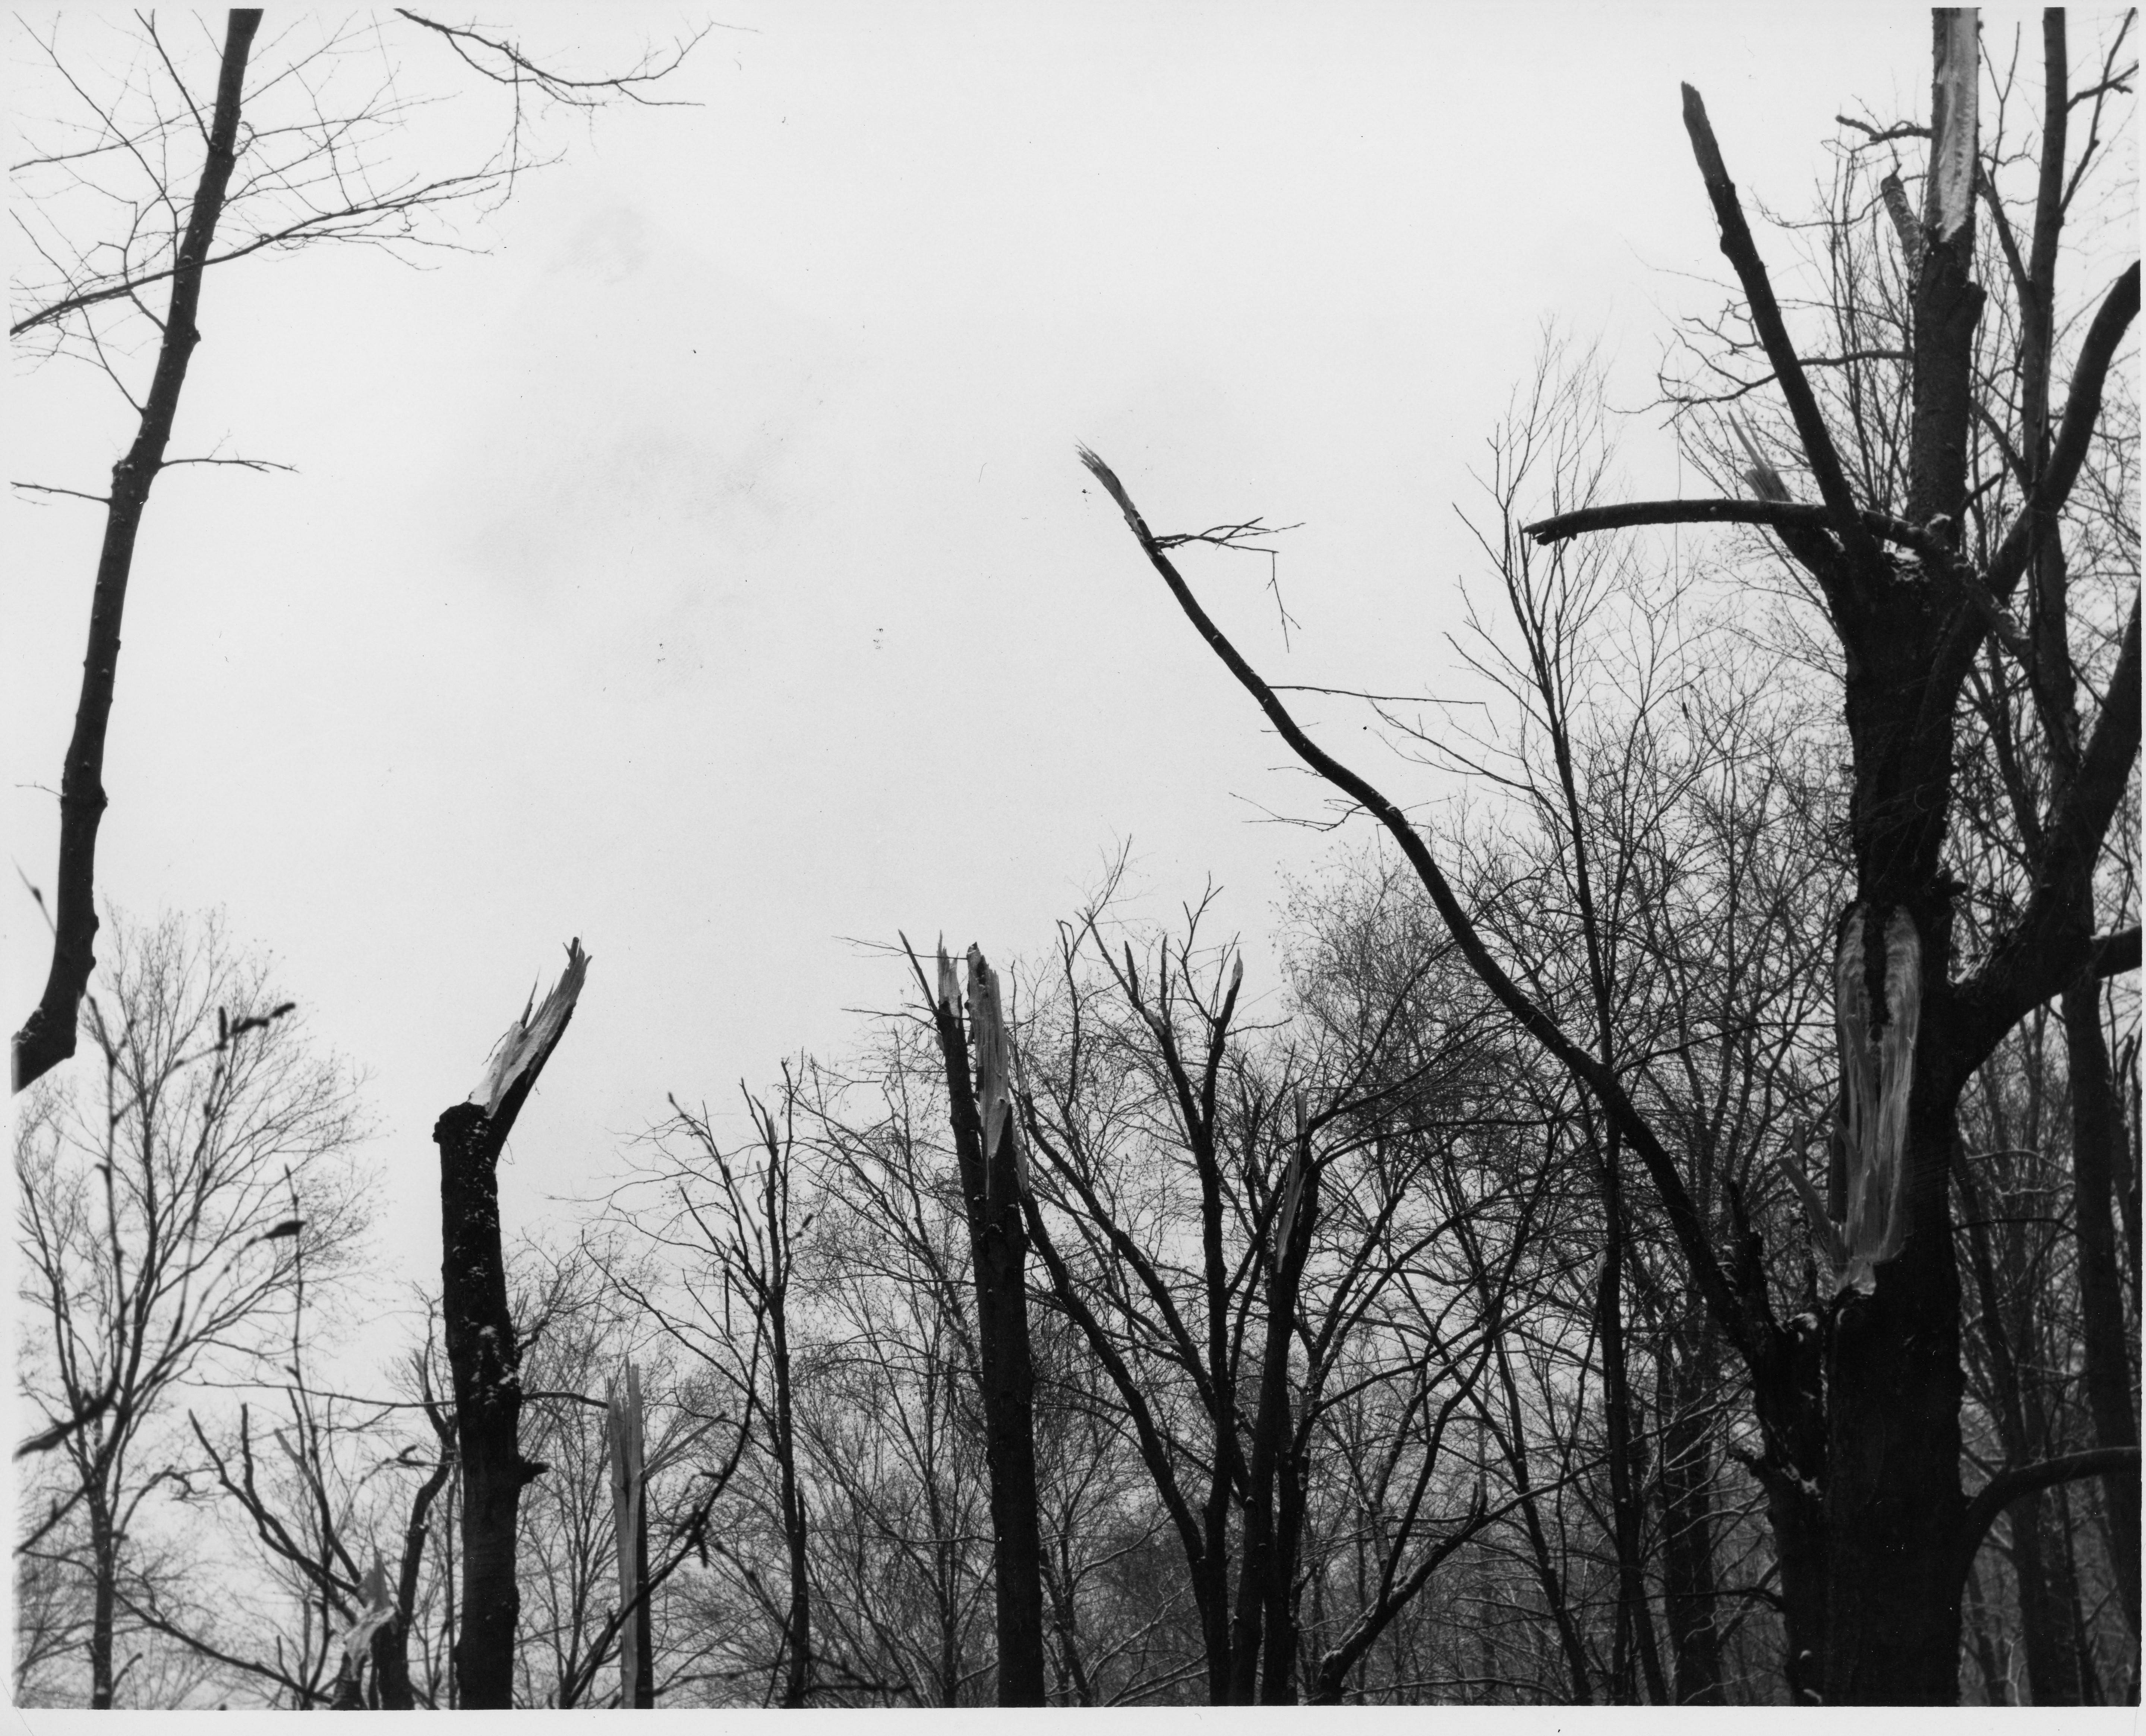 Impact with trees. Photo courtesy of the Williamsport Sun Gazette archive.